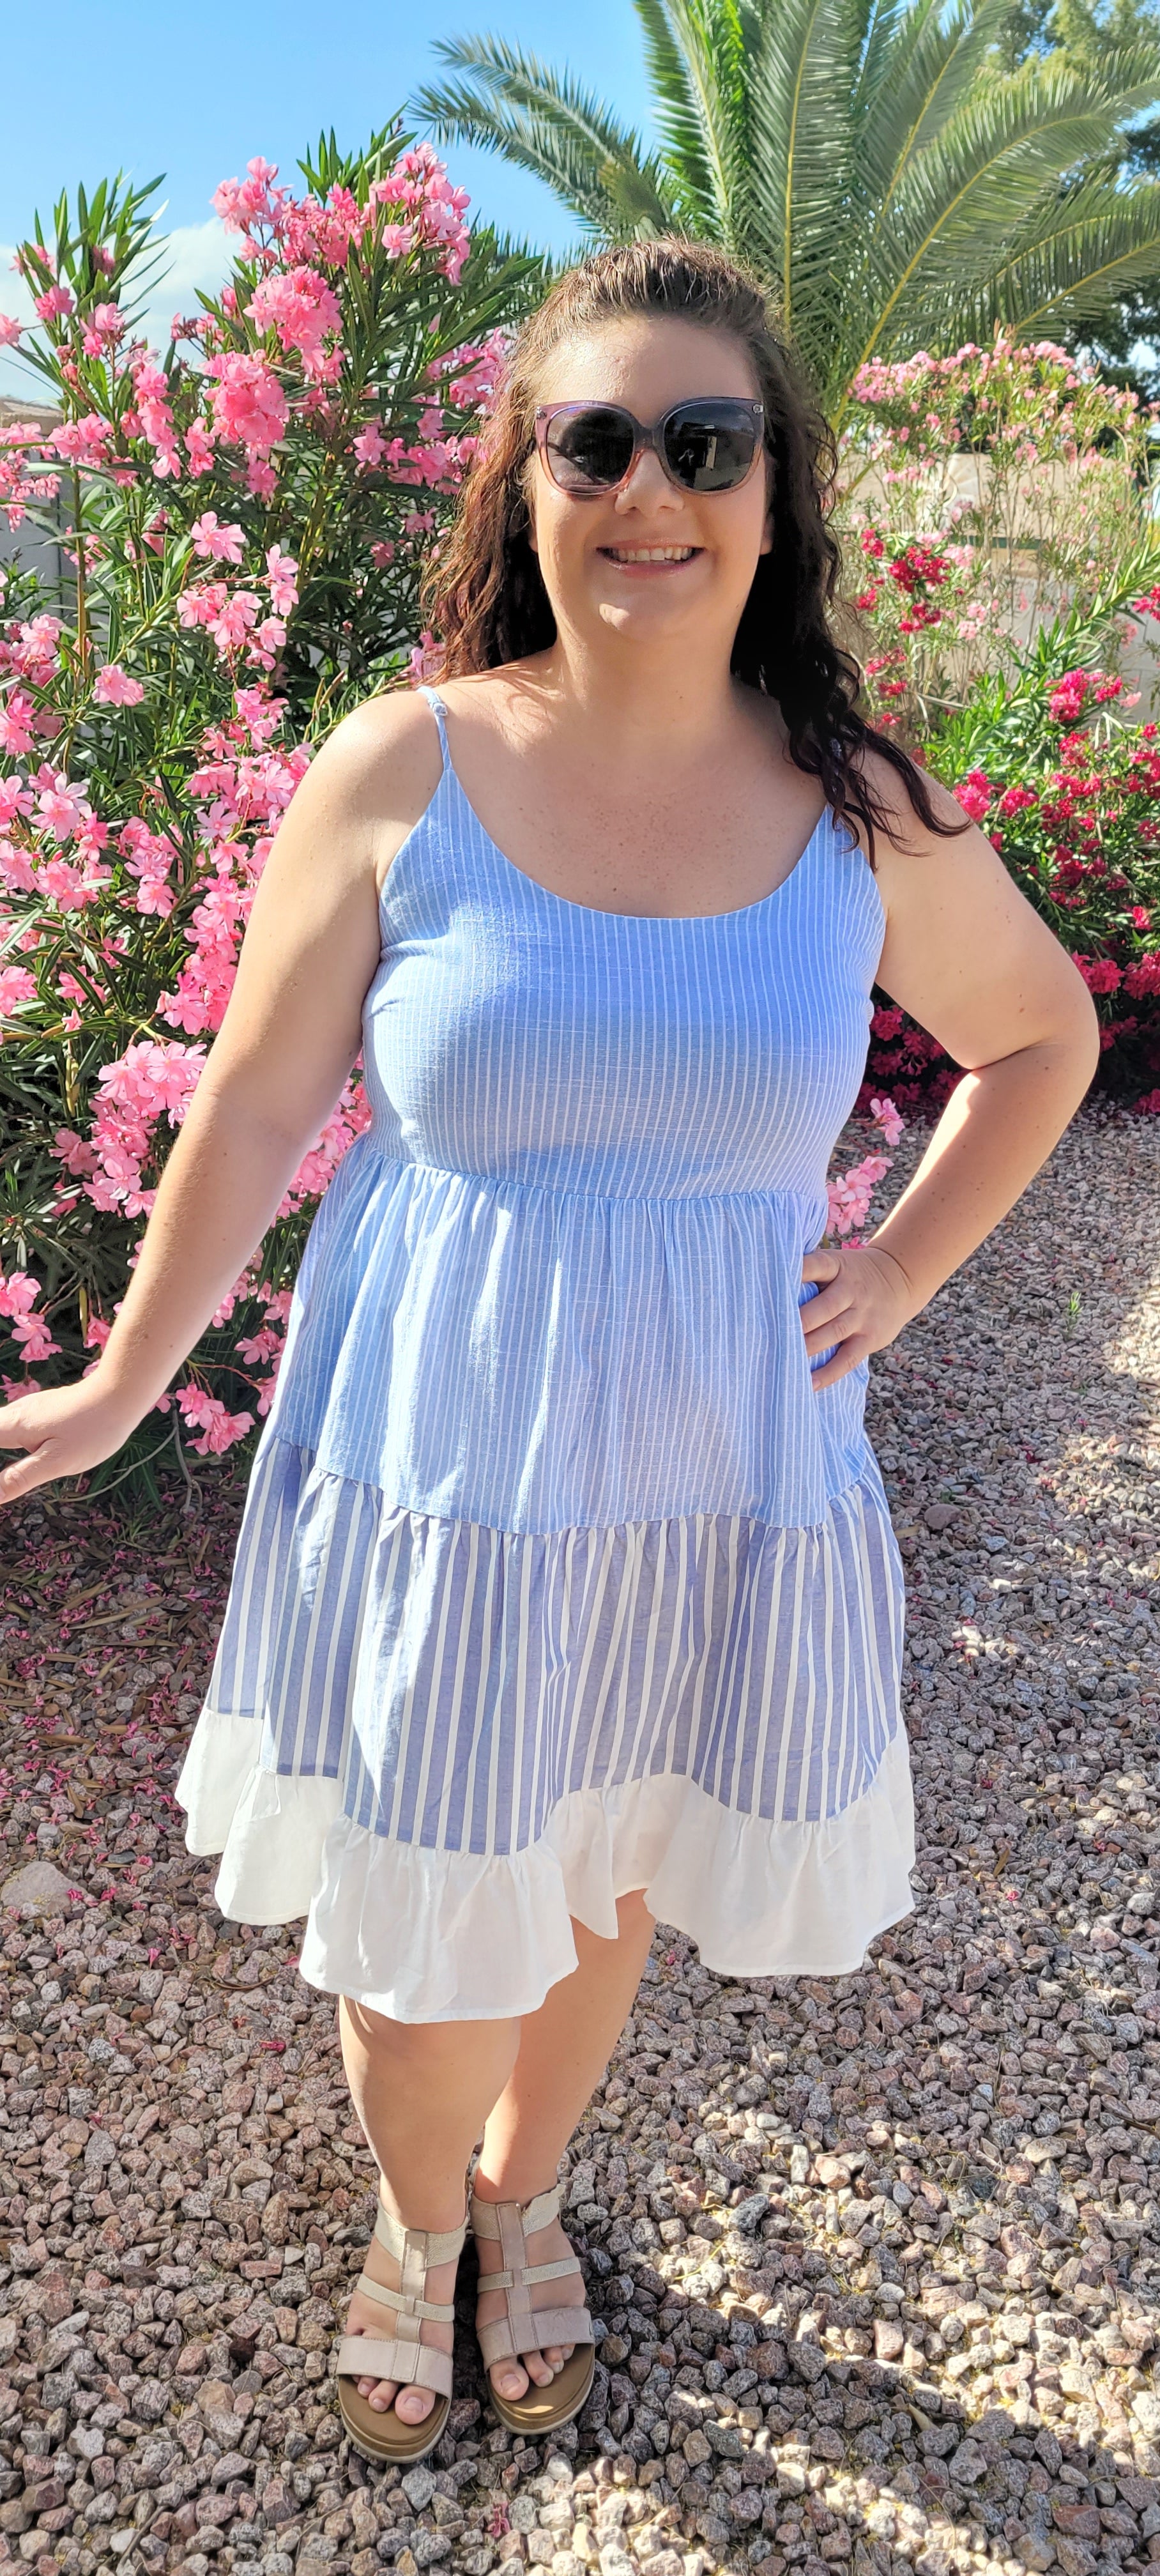 “Beach Hopper” is a midi dress with layers of tiered striped prints. This dress features a white ruffled hemline, adjustable straps, zipper on side with clasp closure, scoop neckline and back, it is lined and does not have stretch. This dress is perfect for a beach getaway! Sizes small through large.